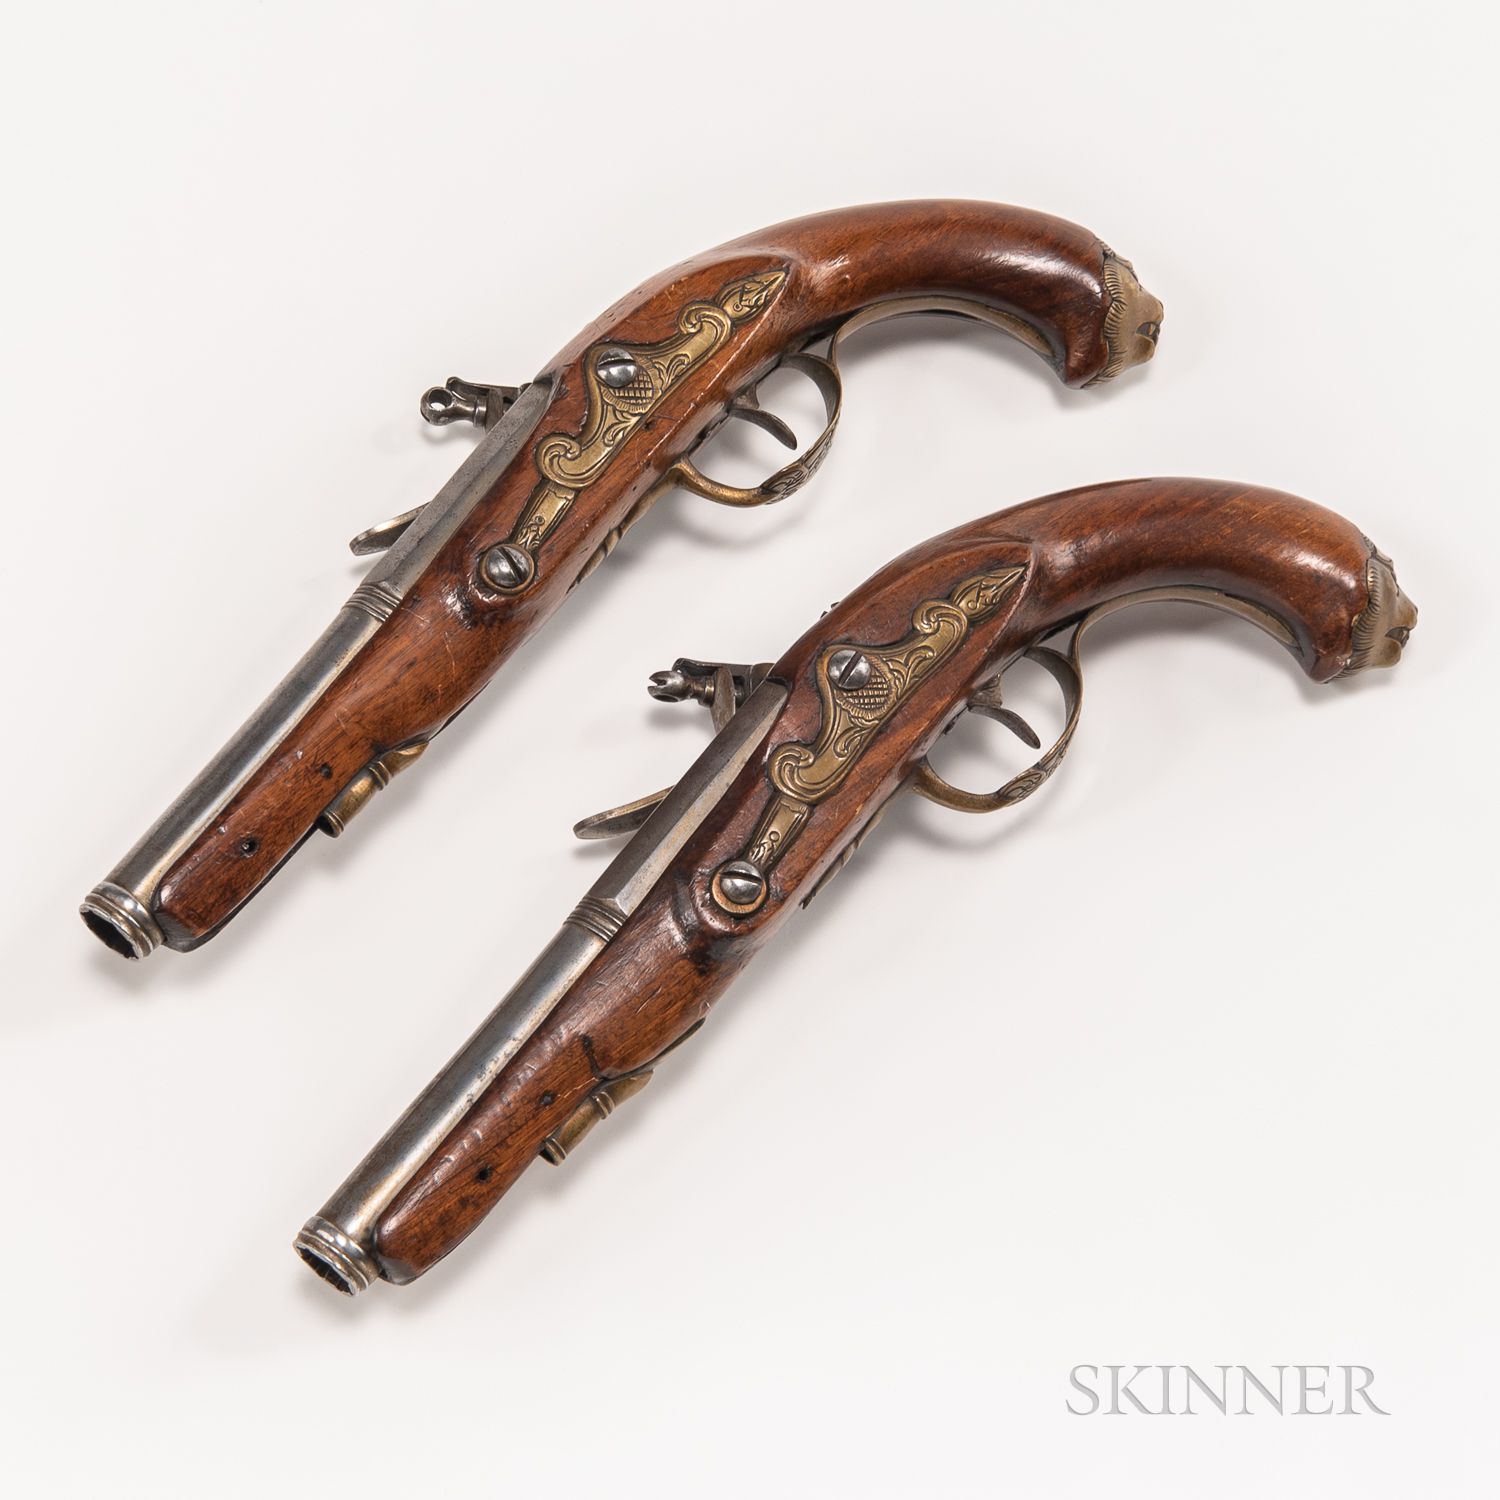 Sold at Auction: T. McCann – Contemporary Flintlock Over-Under